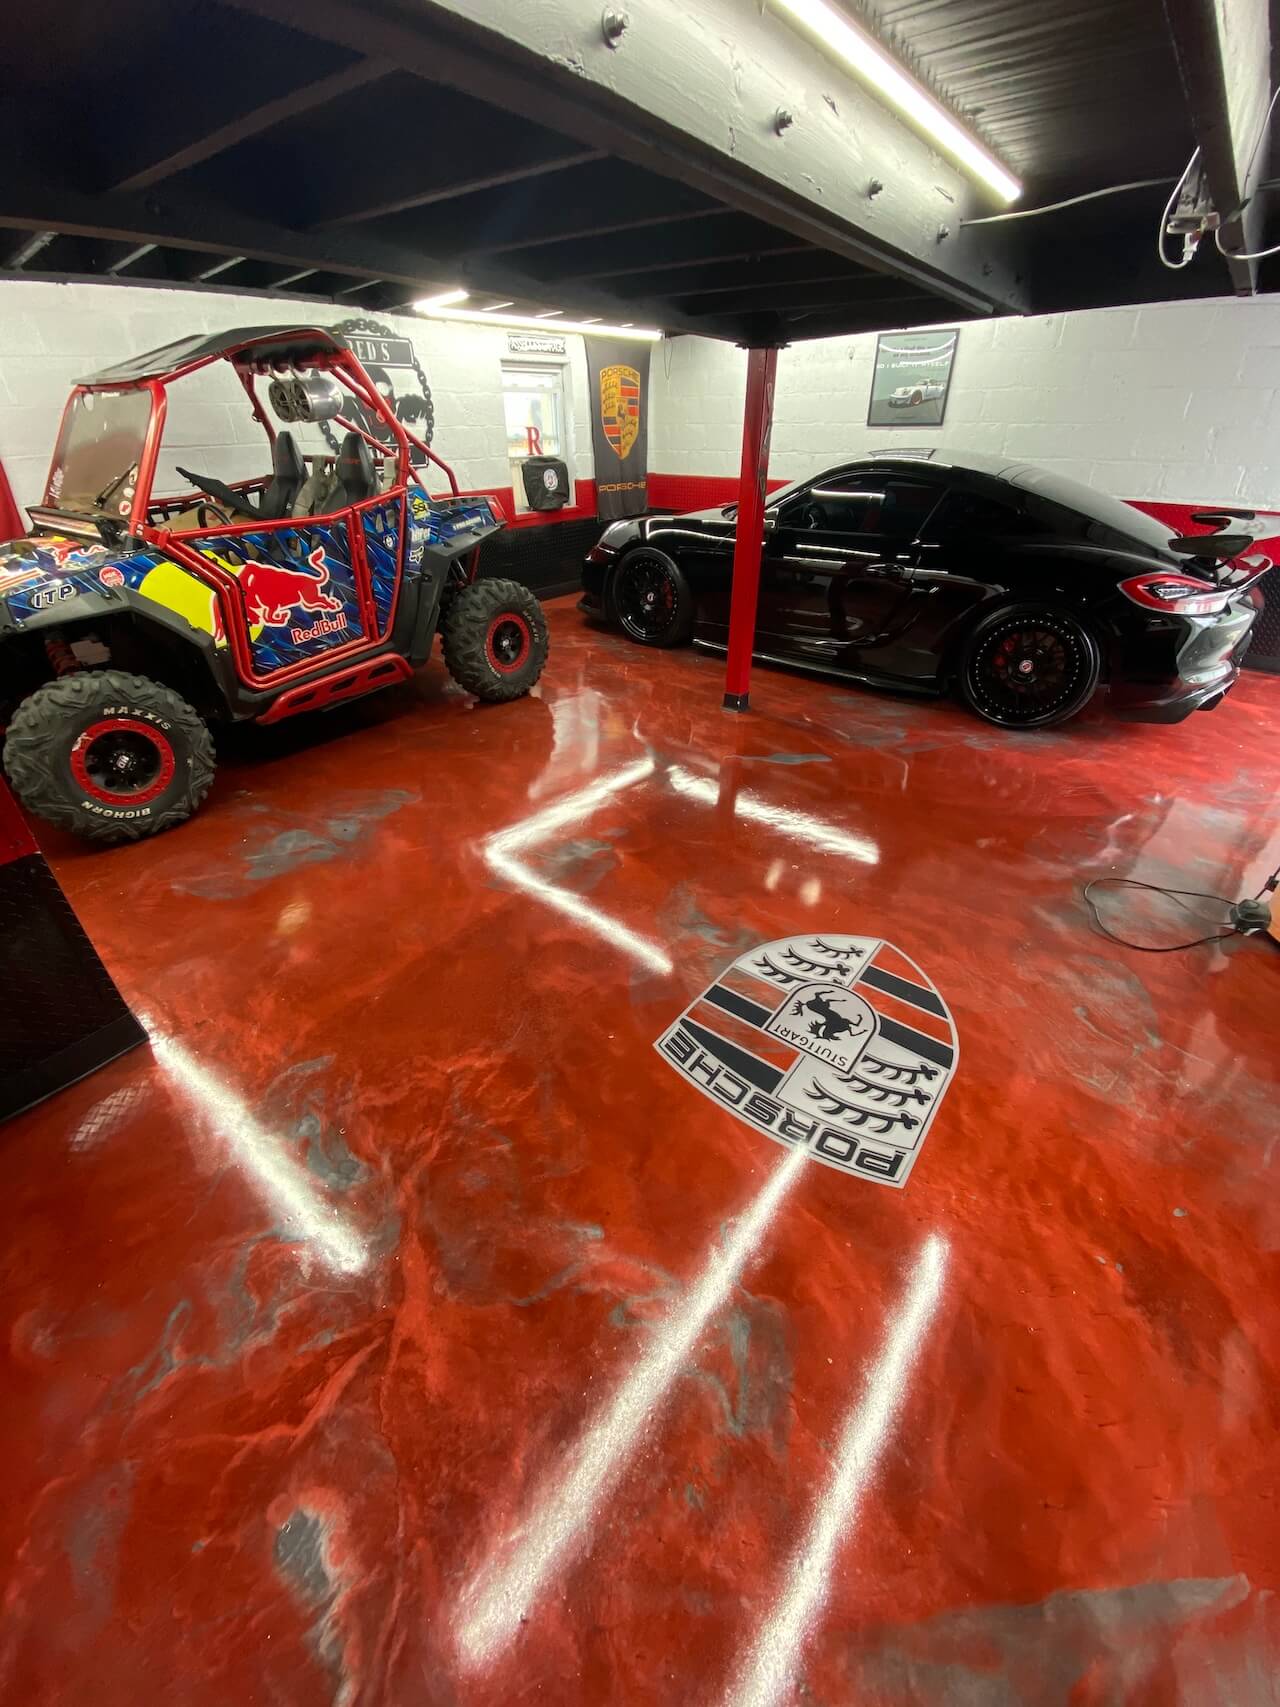 A red and gray epoxy floor with a Porsche car logo inlayed in the center.